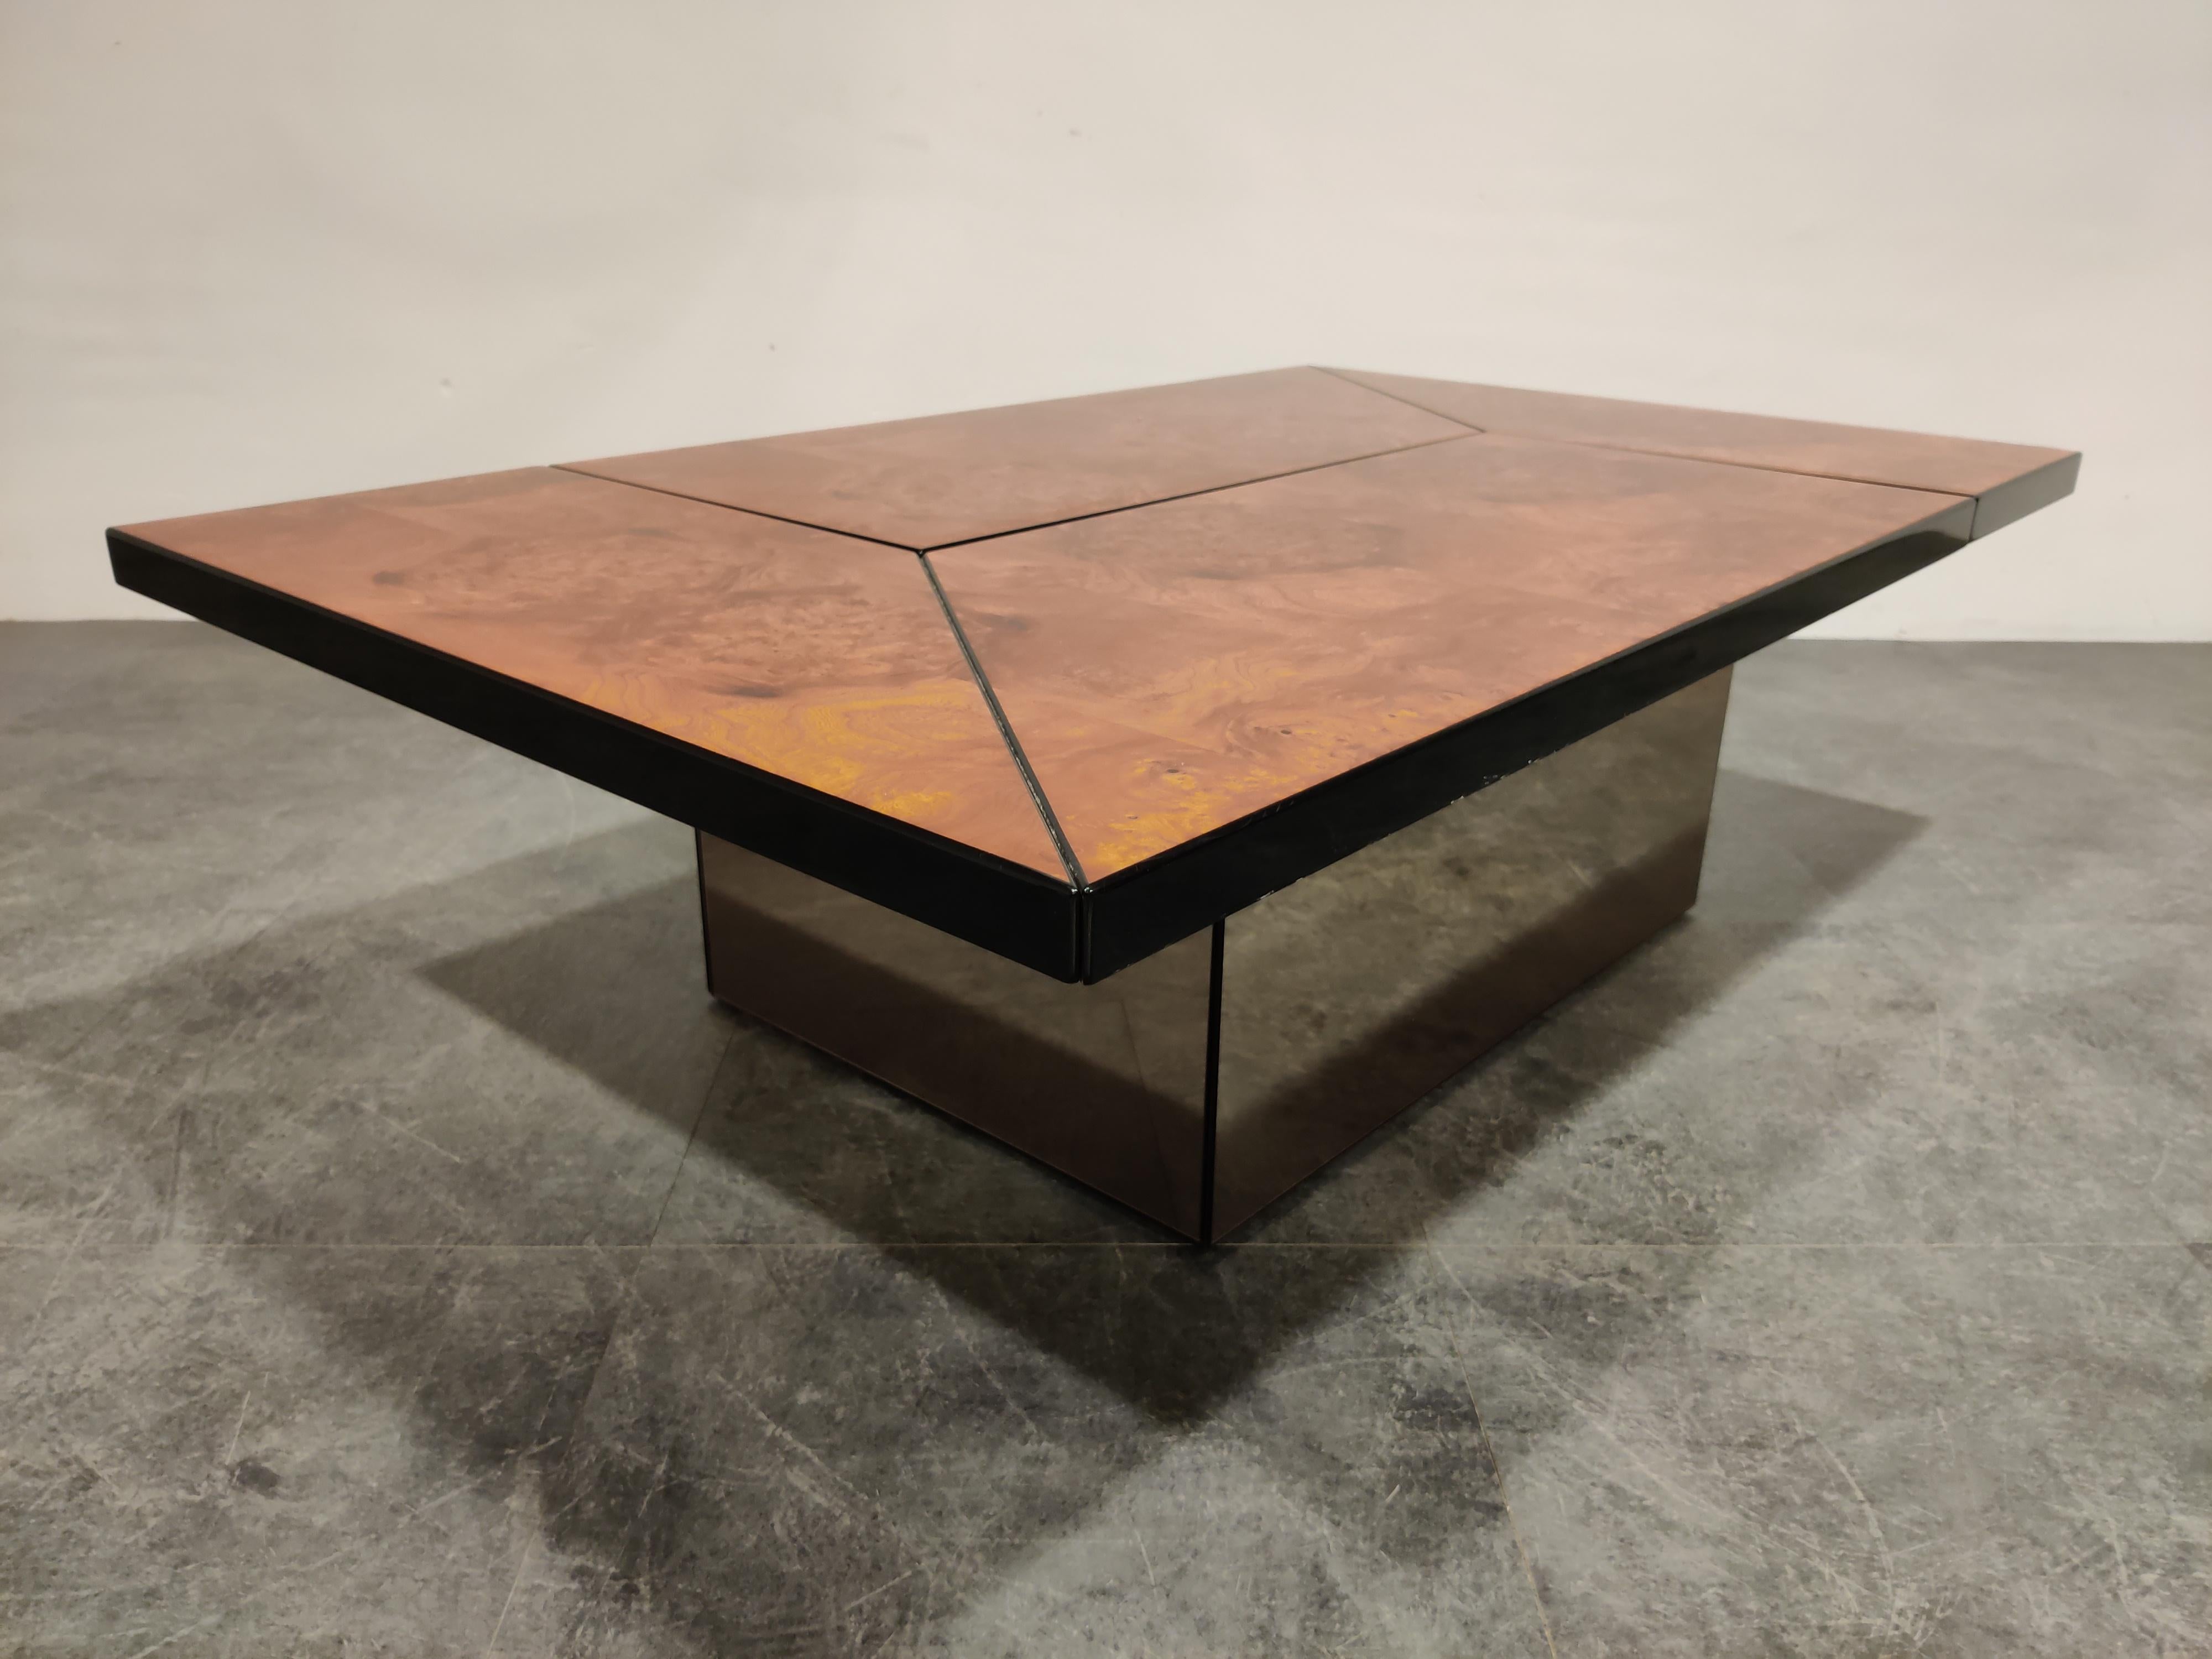 Burl wood coffee table designed by Paul Michel.

This luxurious coffee table is cleverly designed and slides open to reveal a mirrored spacious looking dry bar compartment.

The use of mirrored glass both inside and outside, lacquered finish and